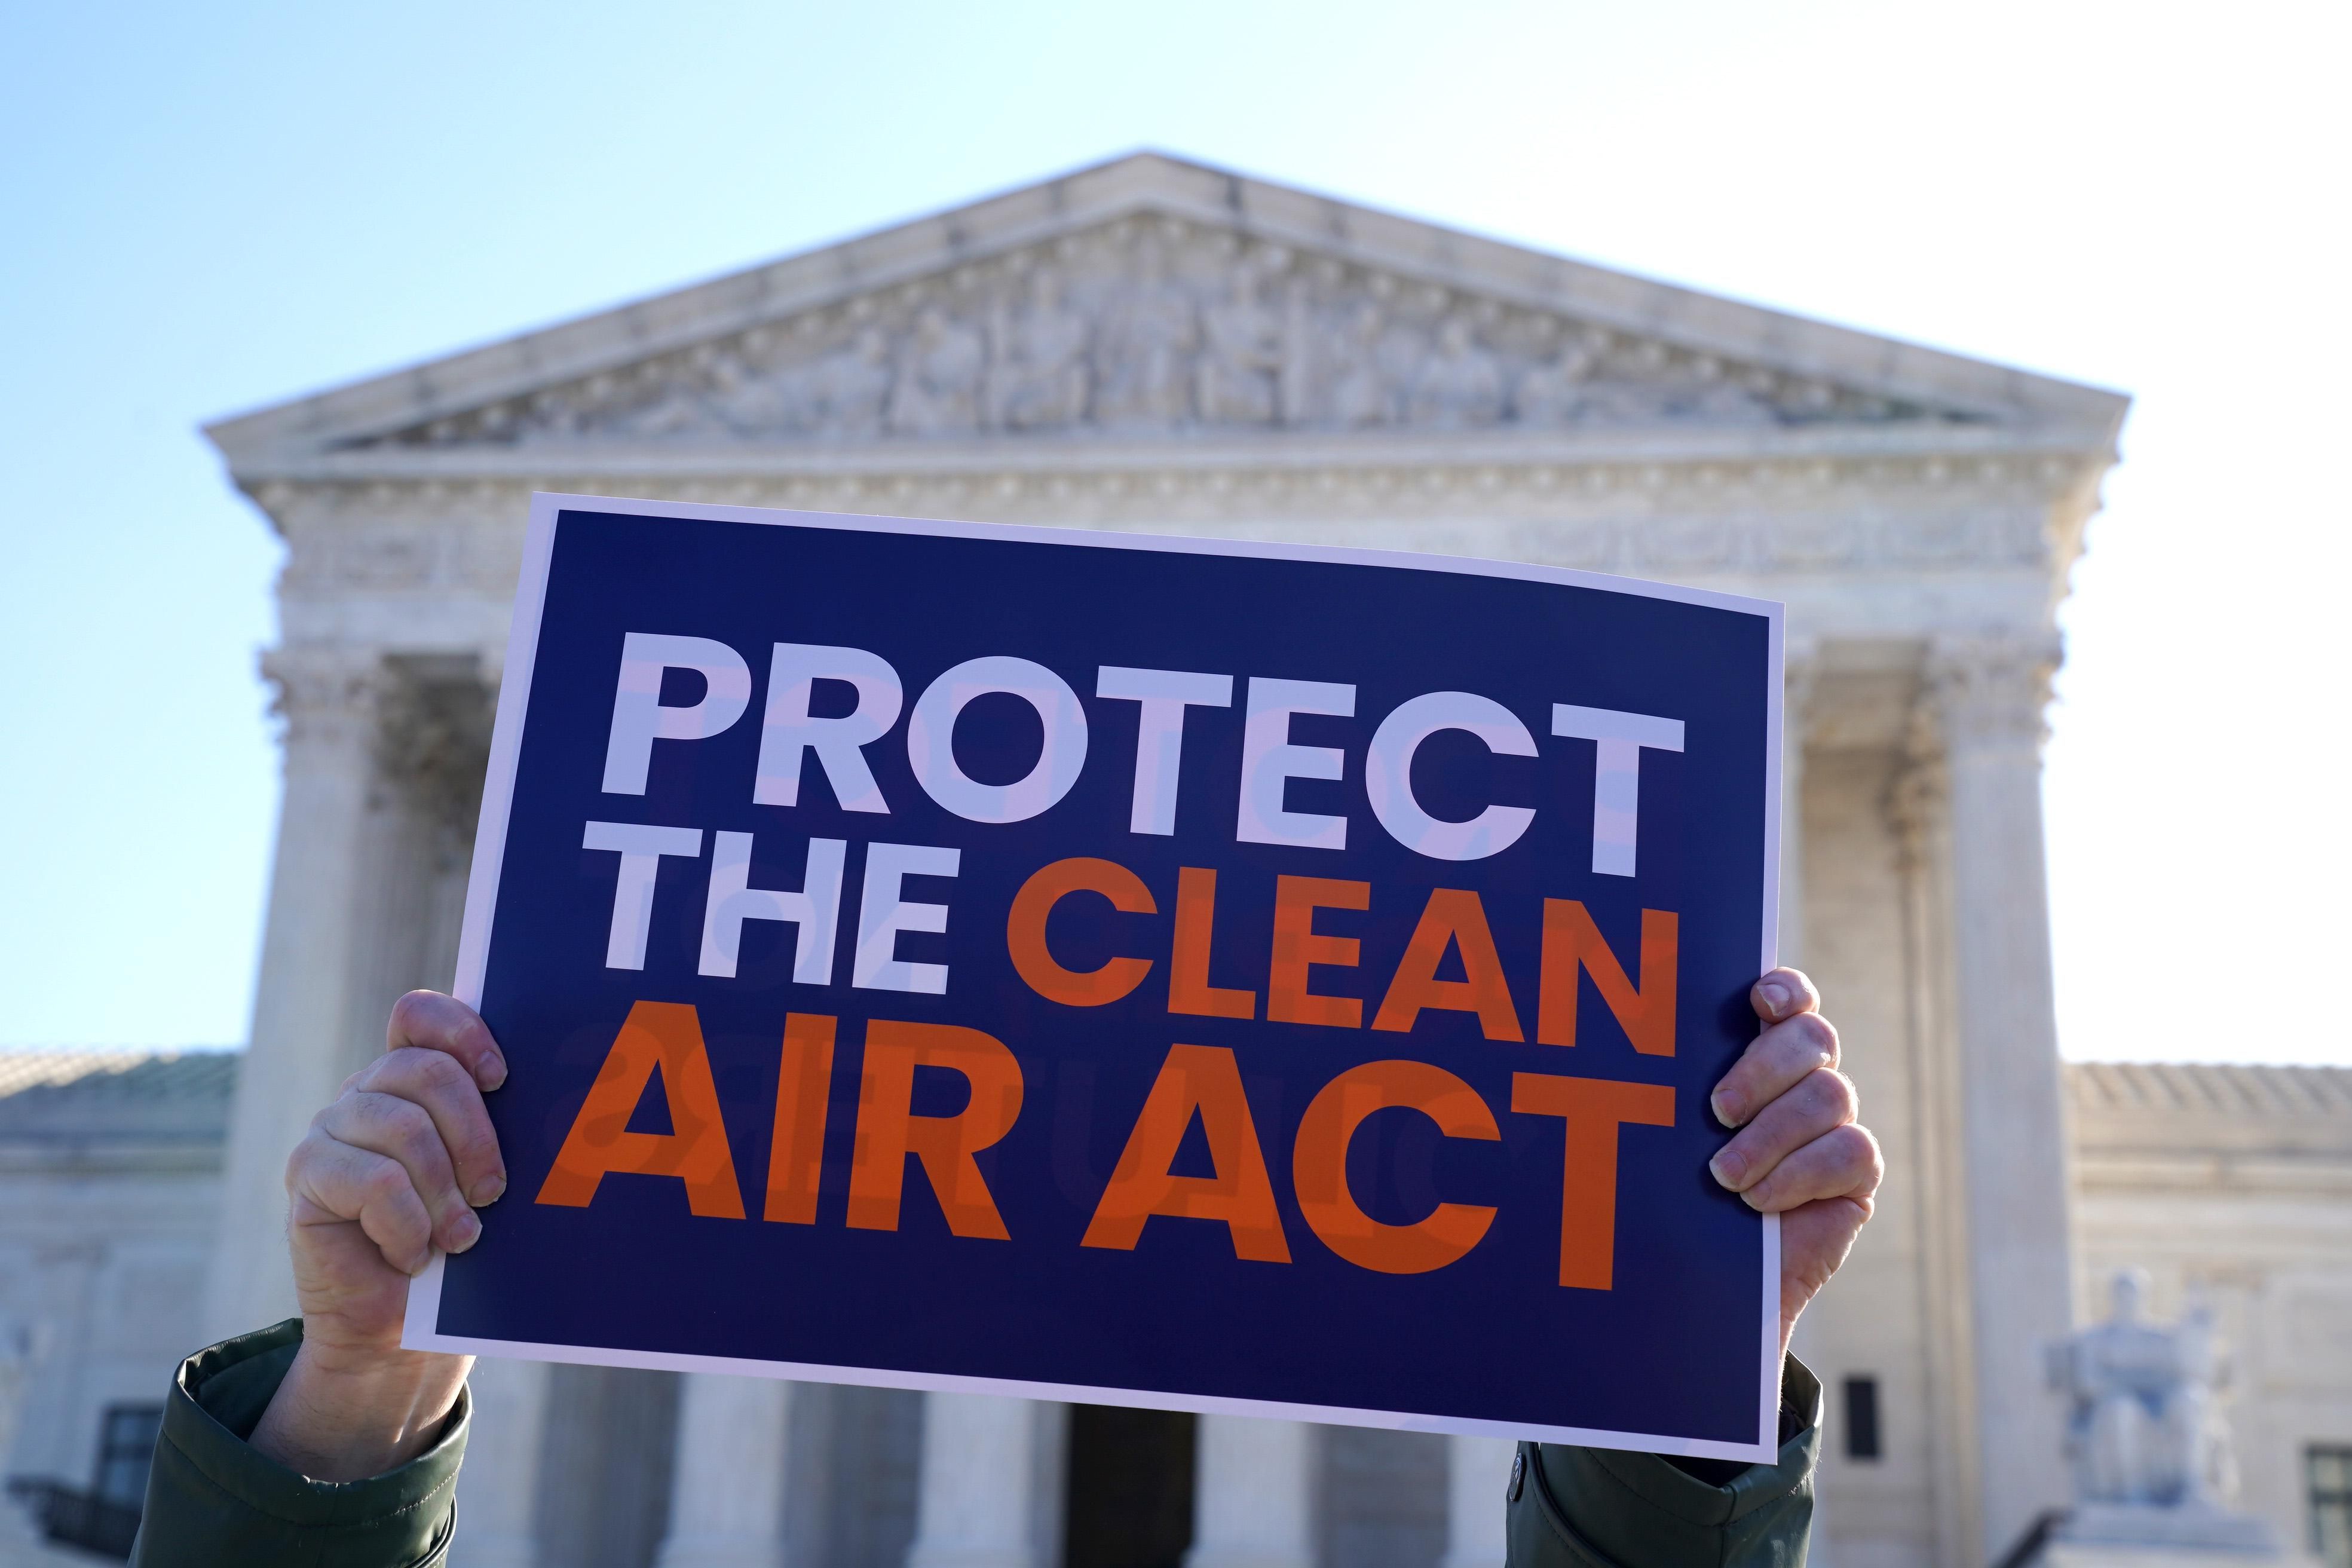 Sign that says "Protect the Clean Air Act"